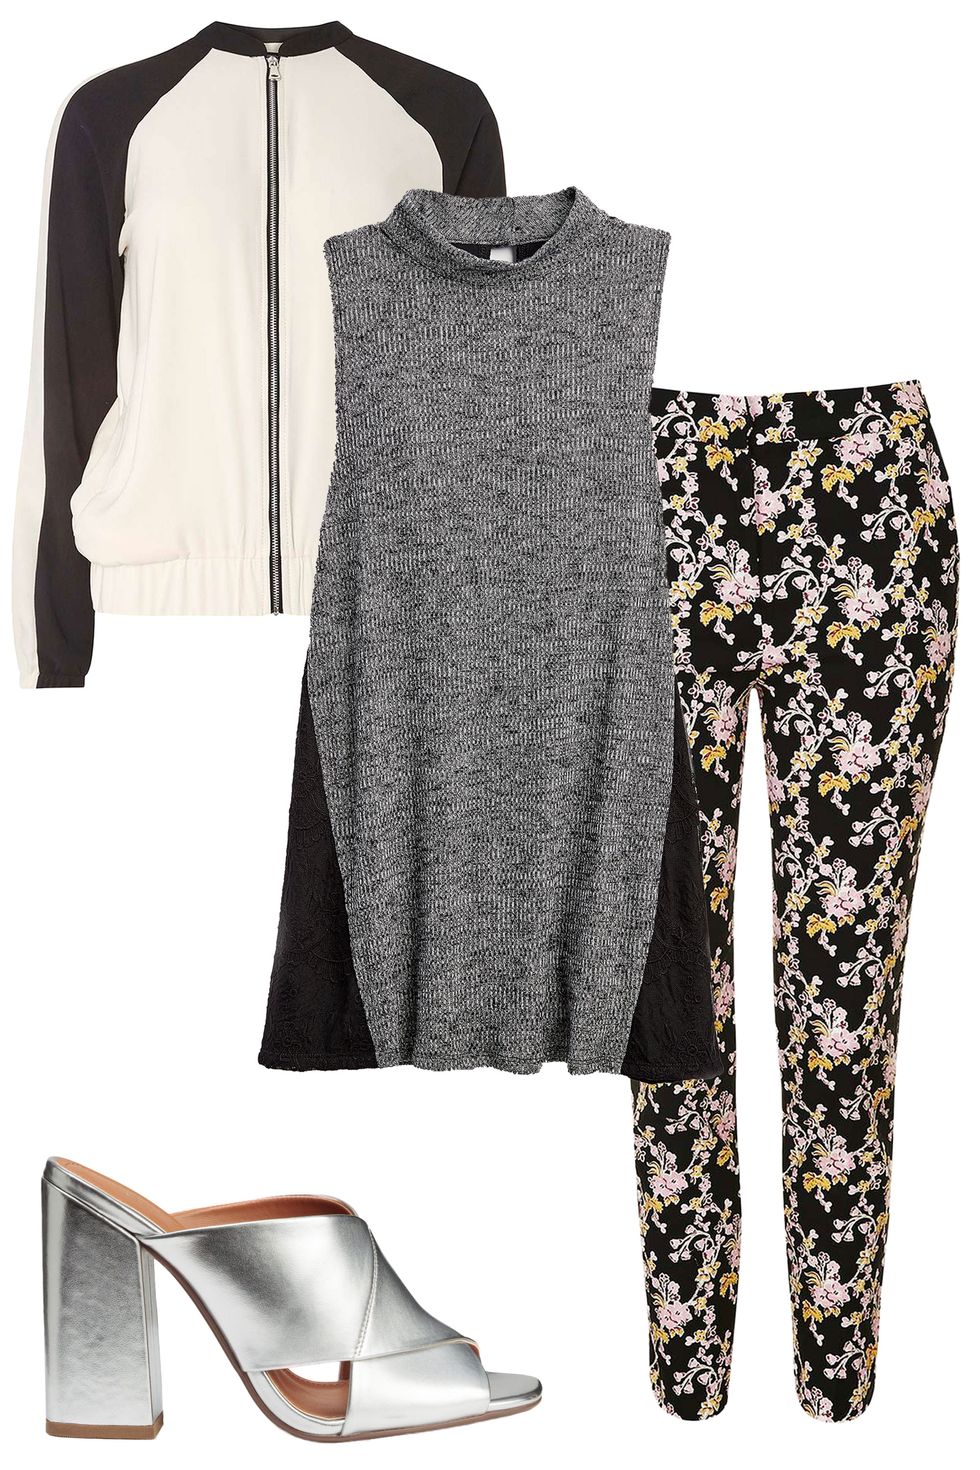 How to Wear Leggings Under A Dress: 32 Outfit Ideas